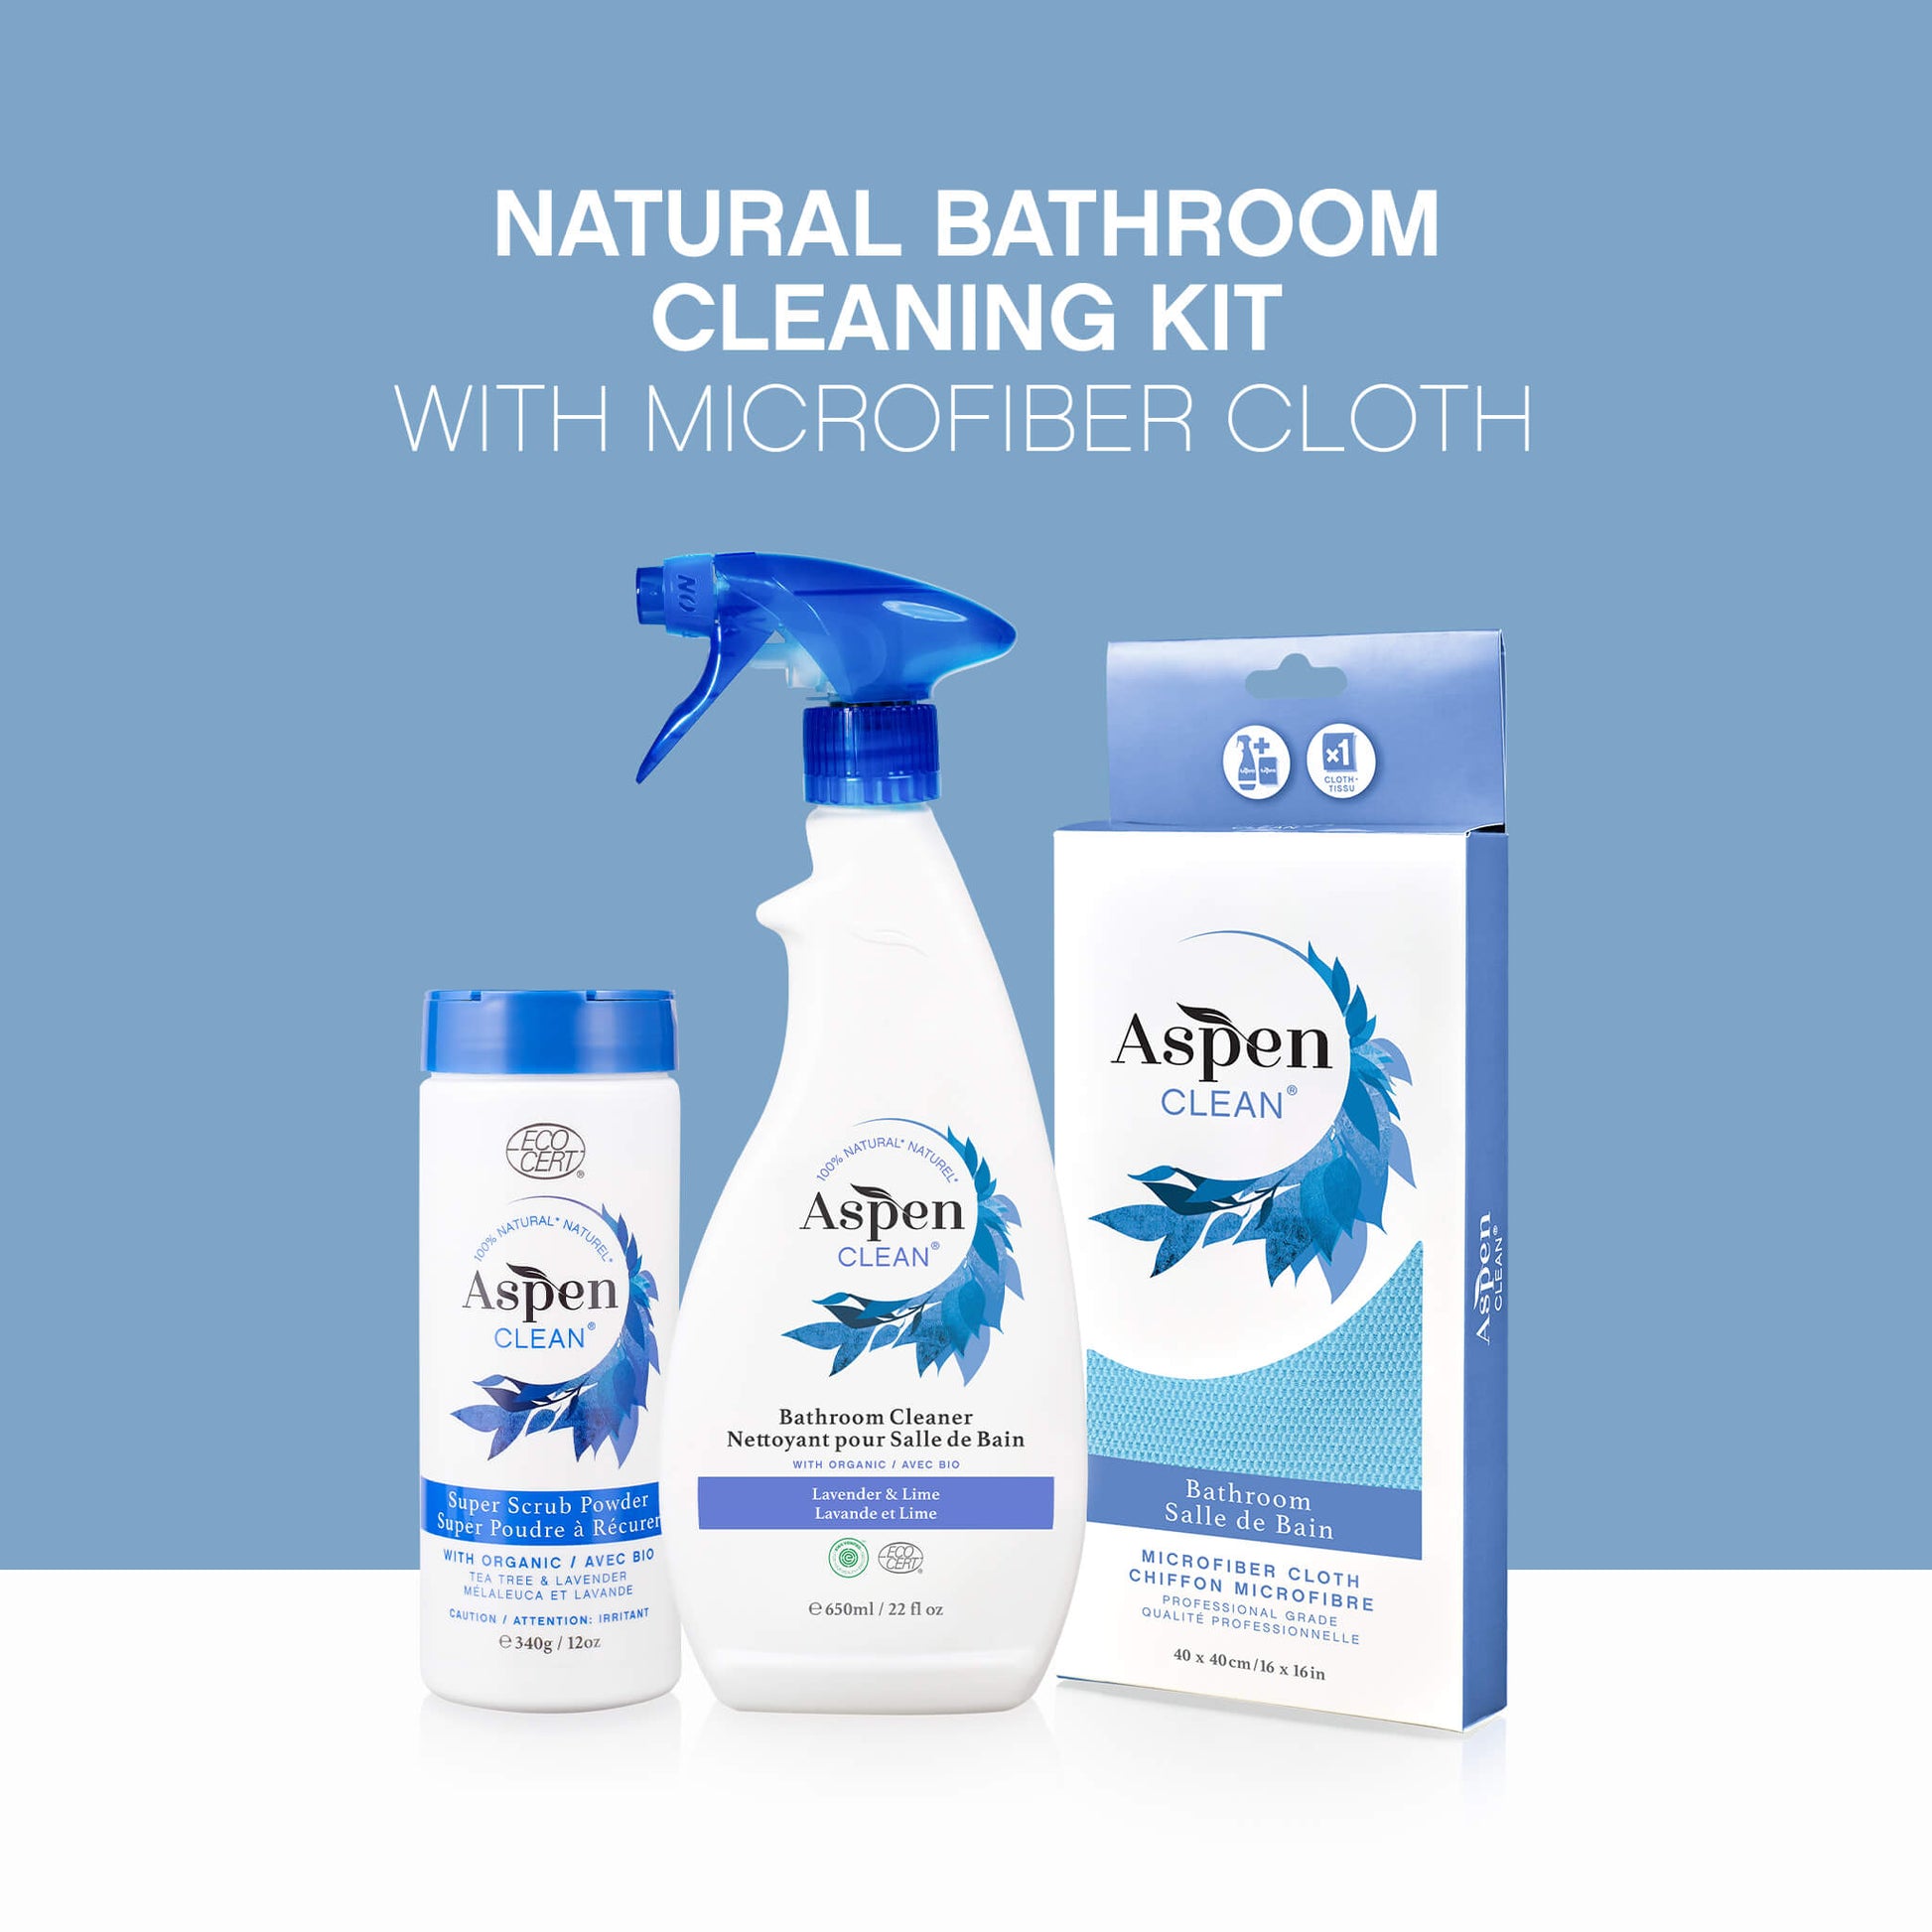 Natural Bathroom Cleaning Kit with Microfiber Cloth